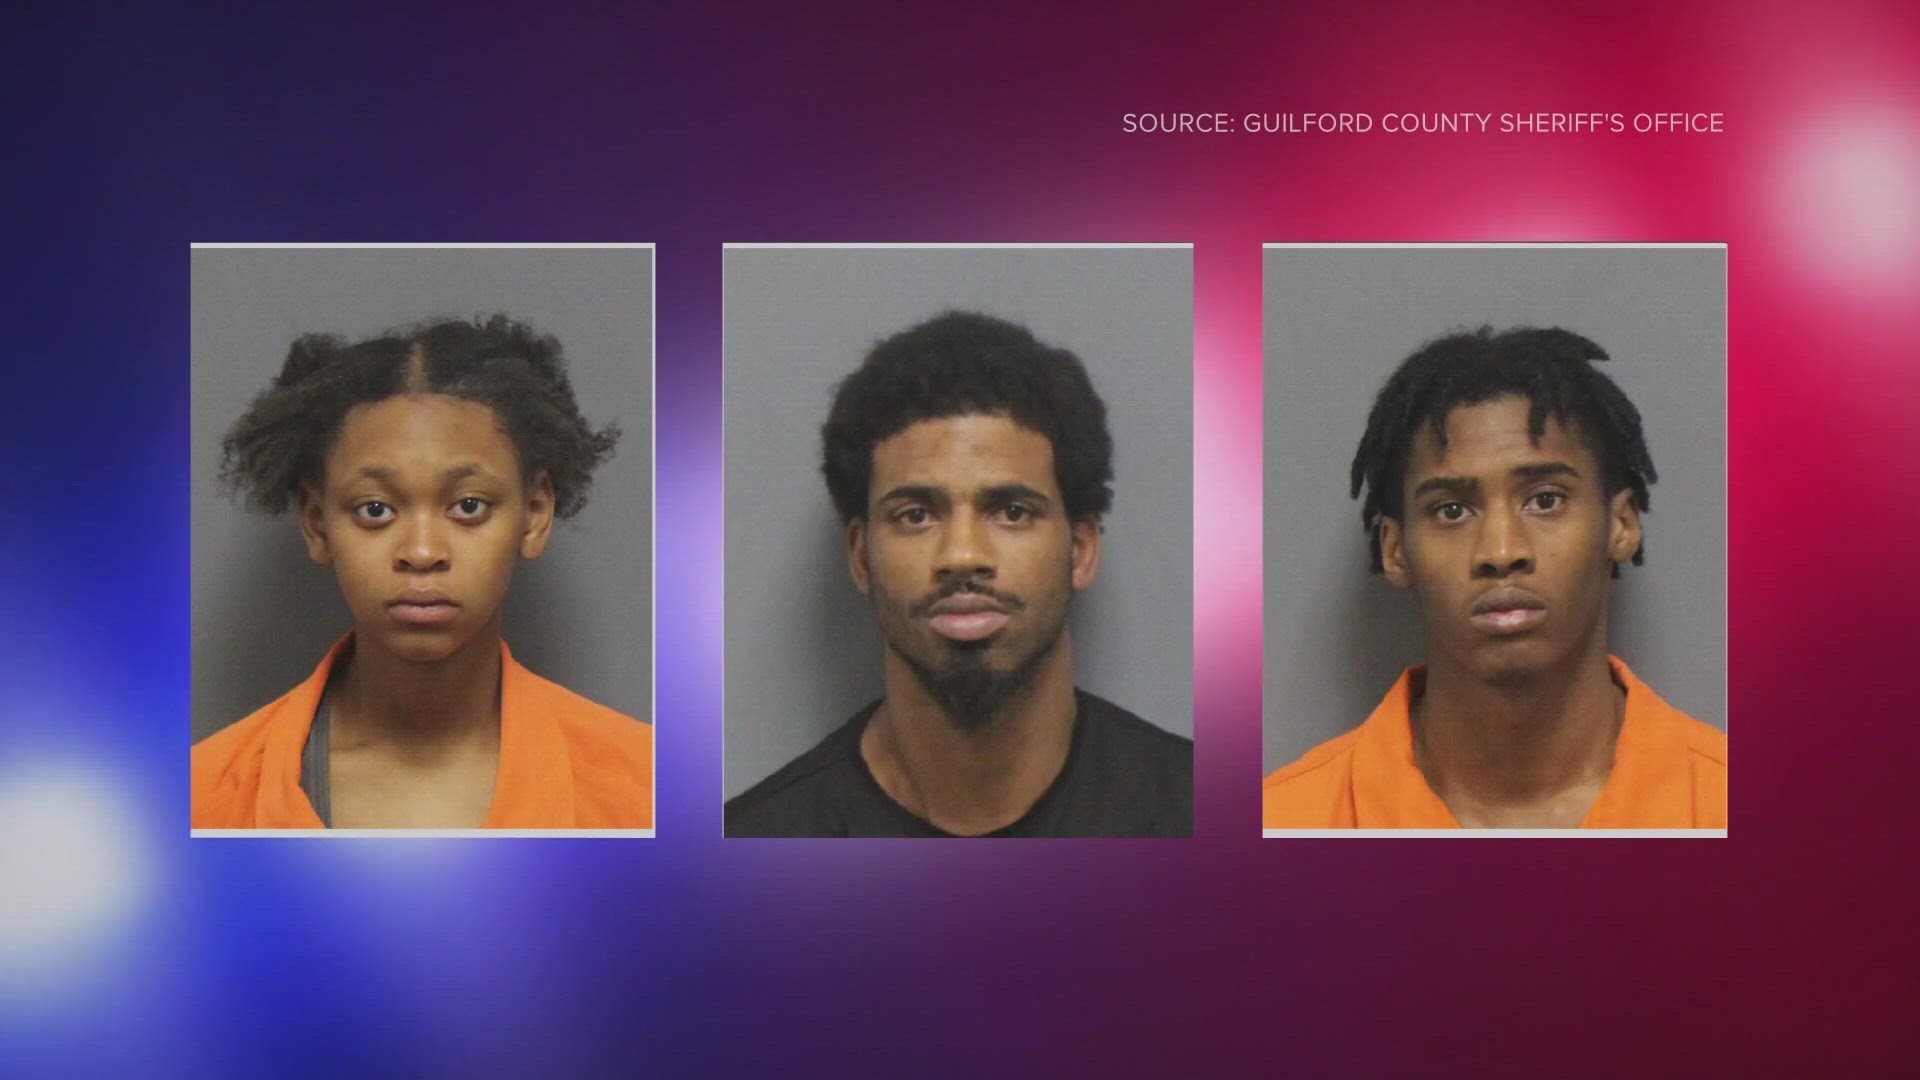 Winston-Salem residents Jamere Foster, James Morrison, and Z'quriah Blackwell are all being charged with separate offenses in the case.